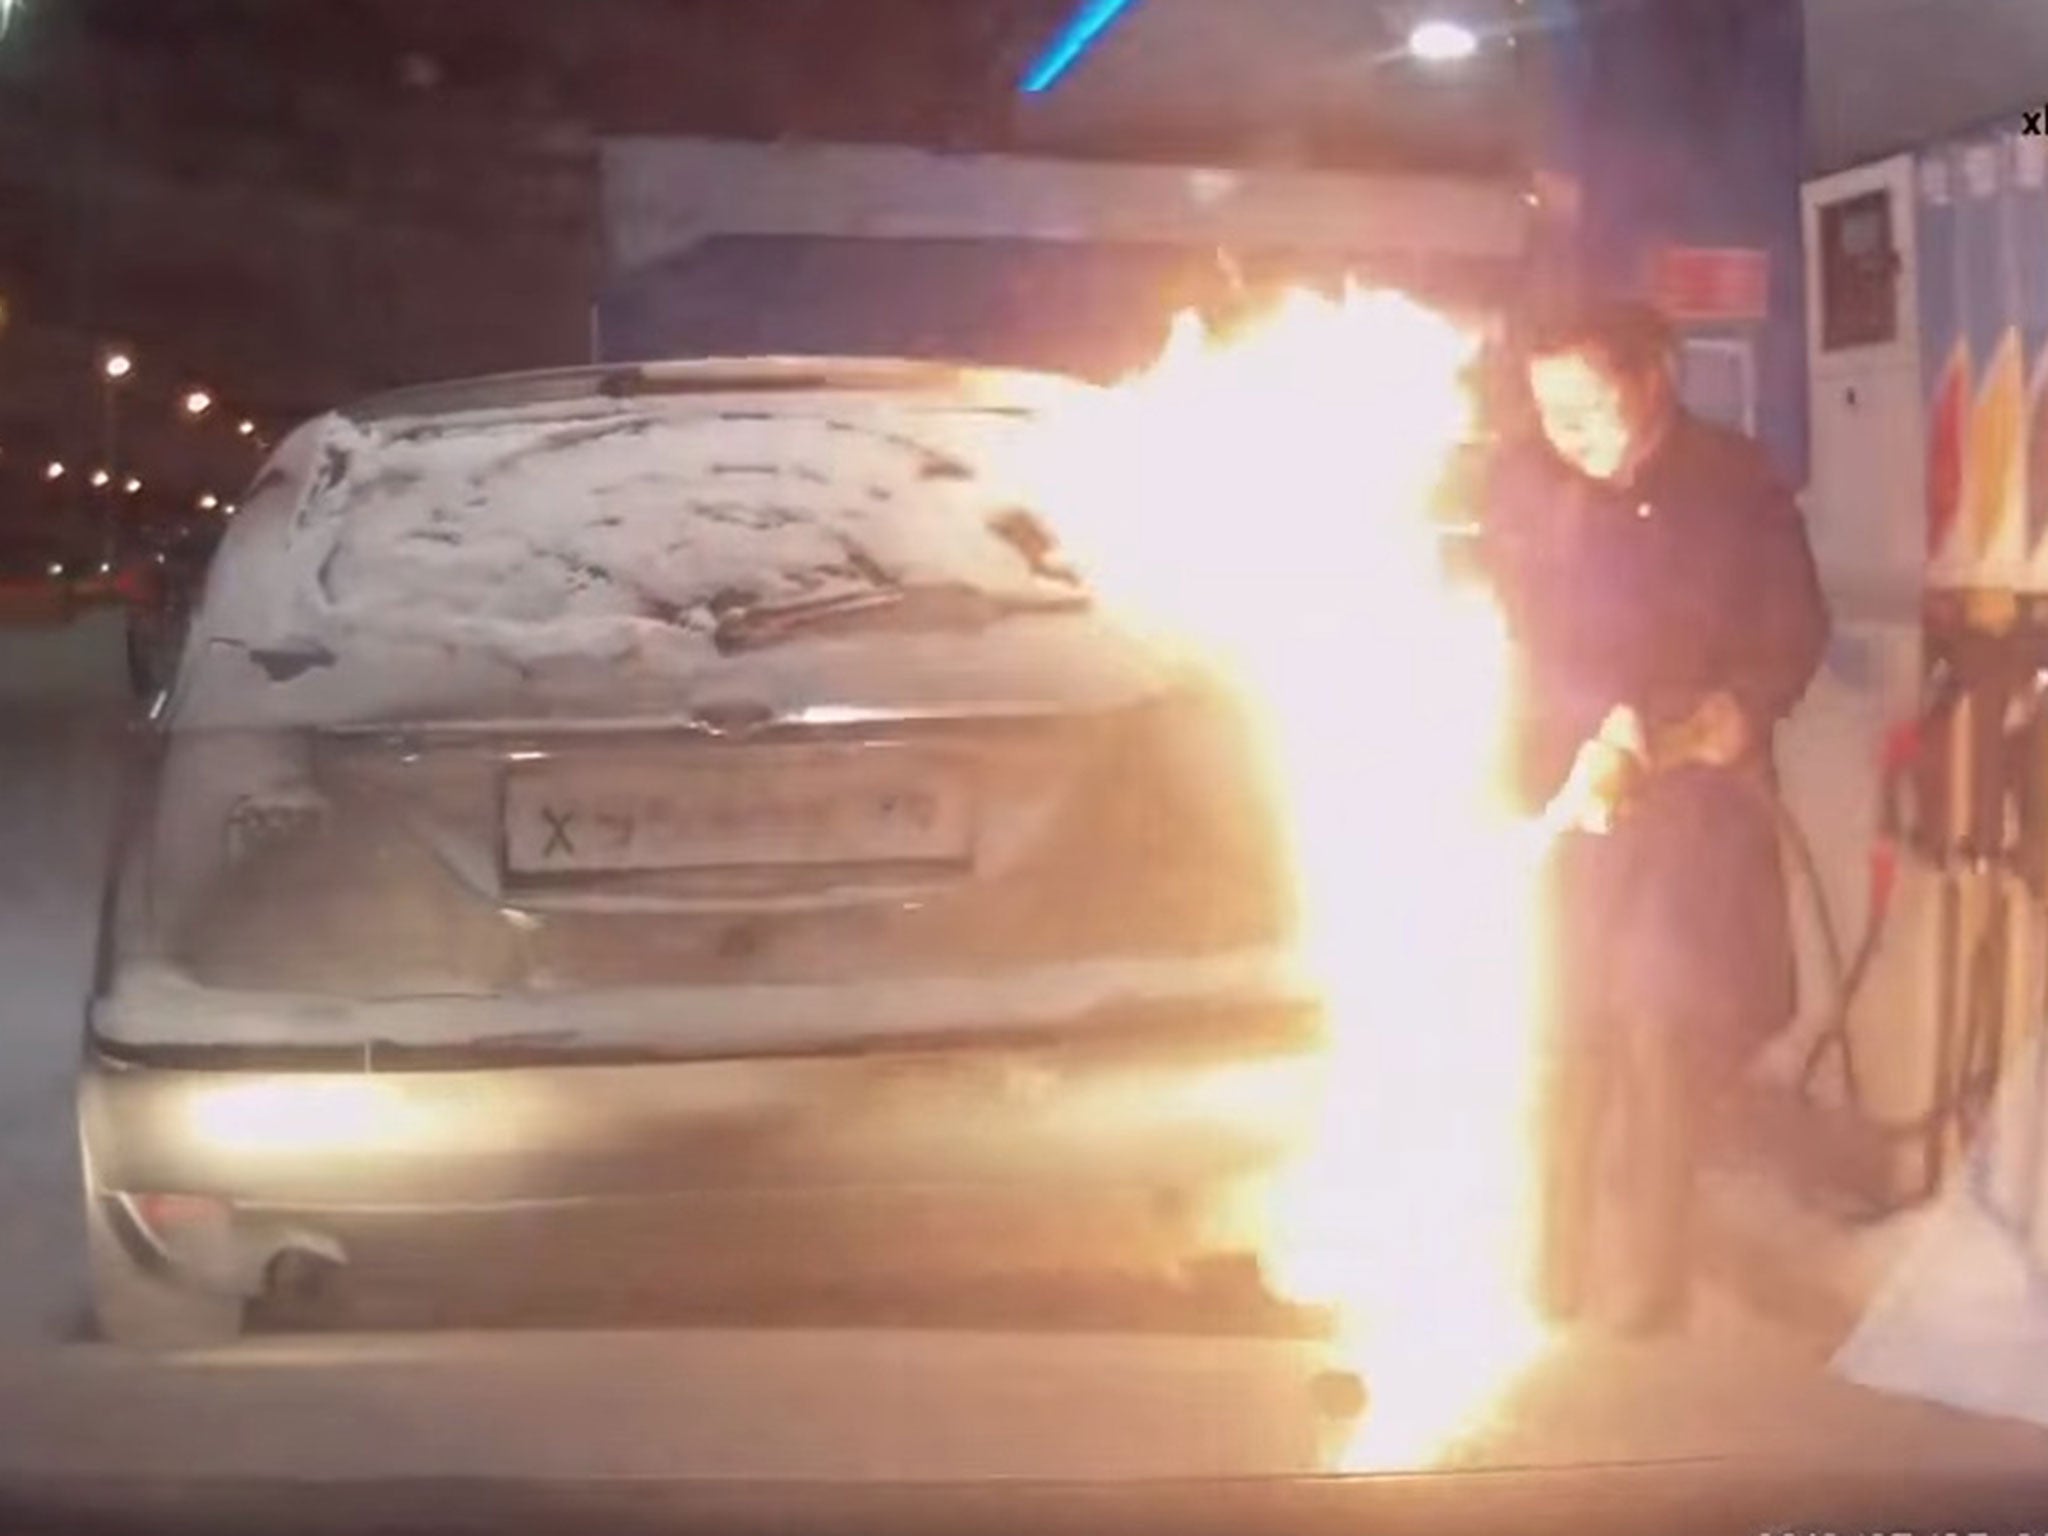 Flames soon lick up the car's exterior and spread